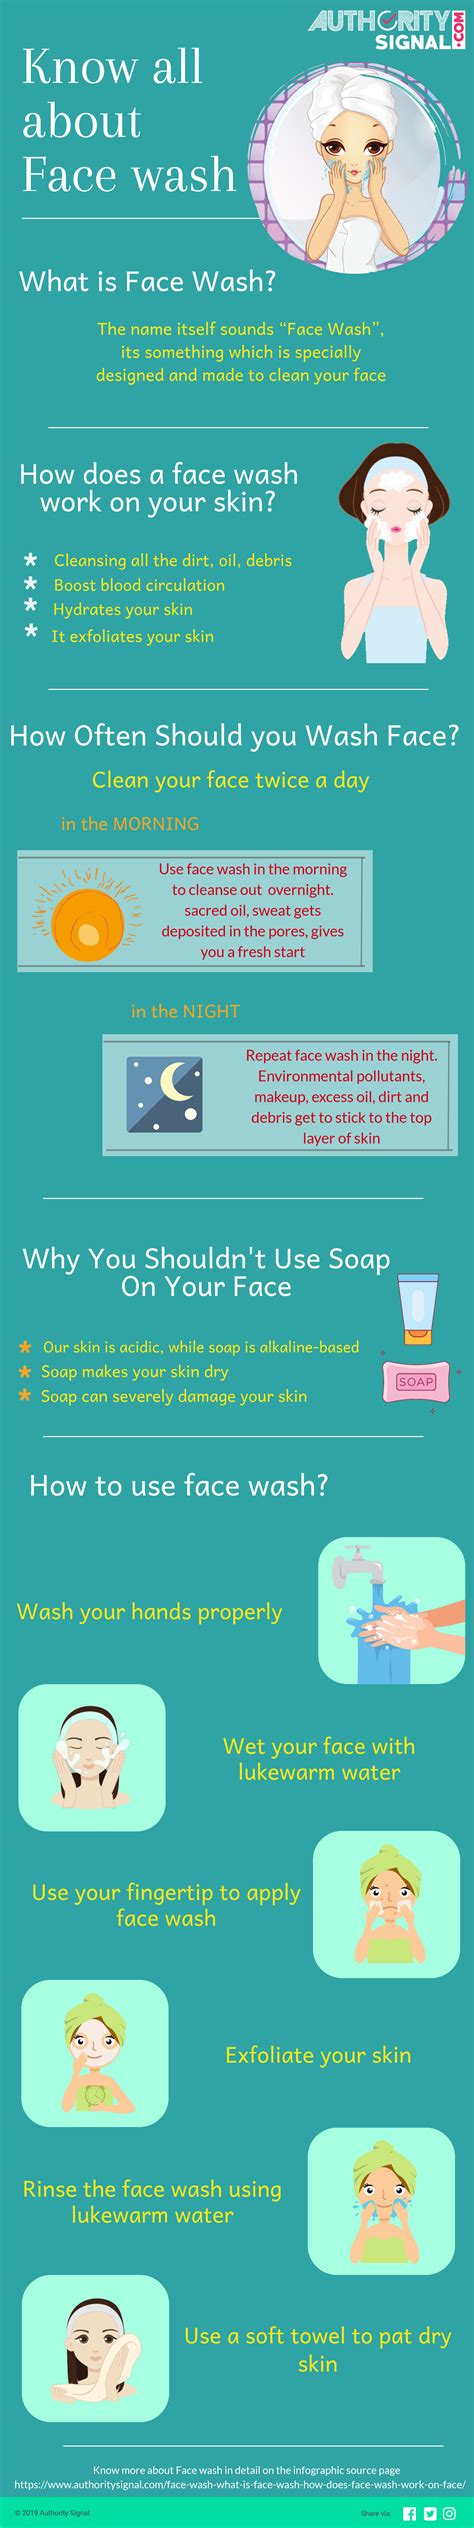 Face Wash - what is face wash? How does face wash work on face? | Face wash, Organic face wash 